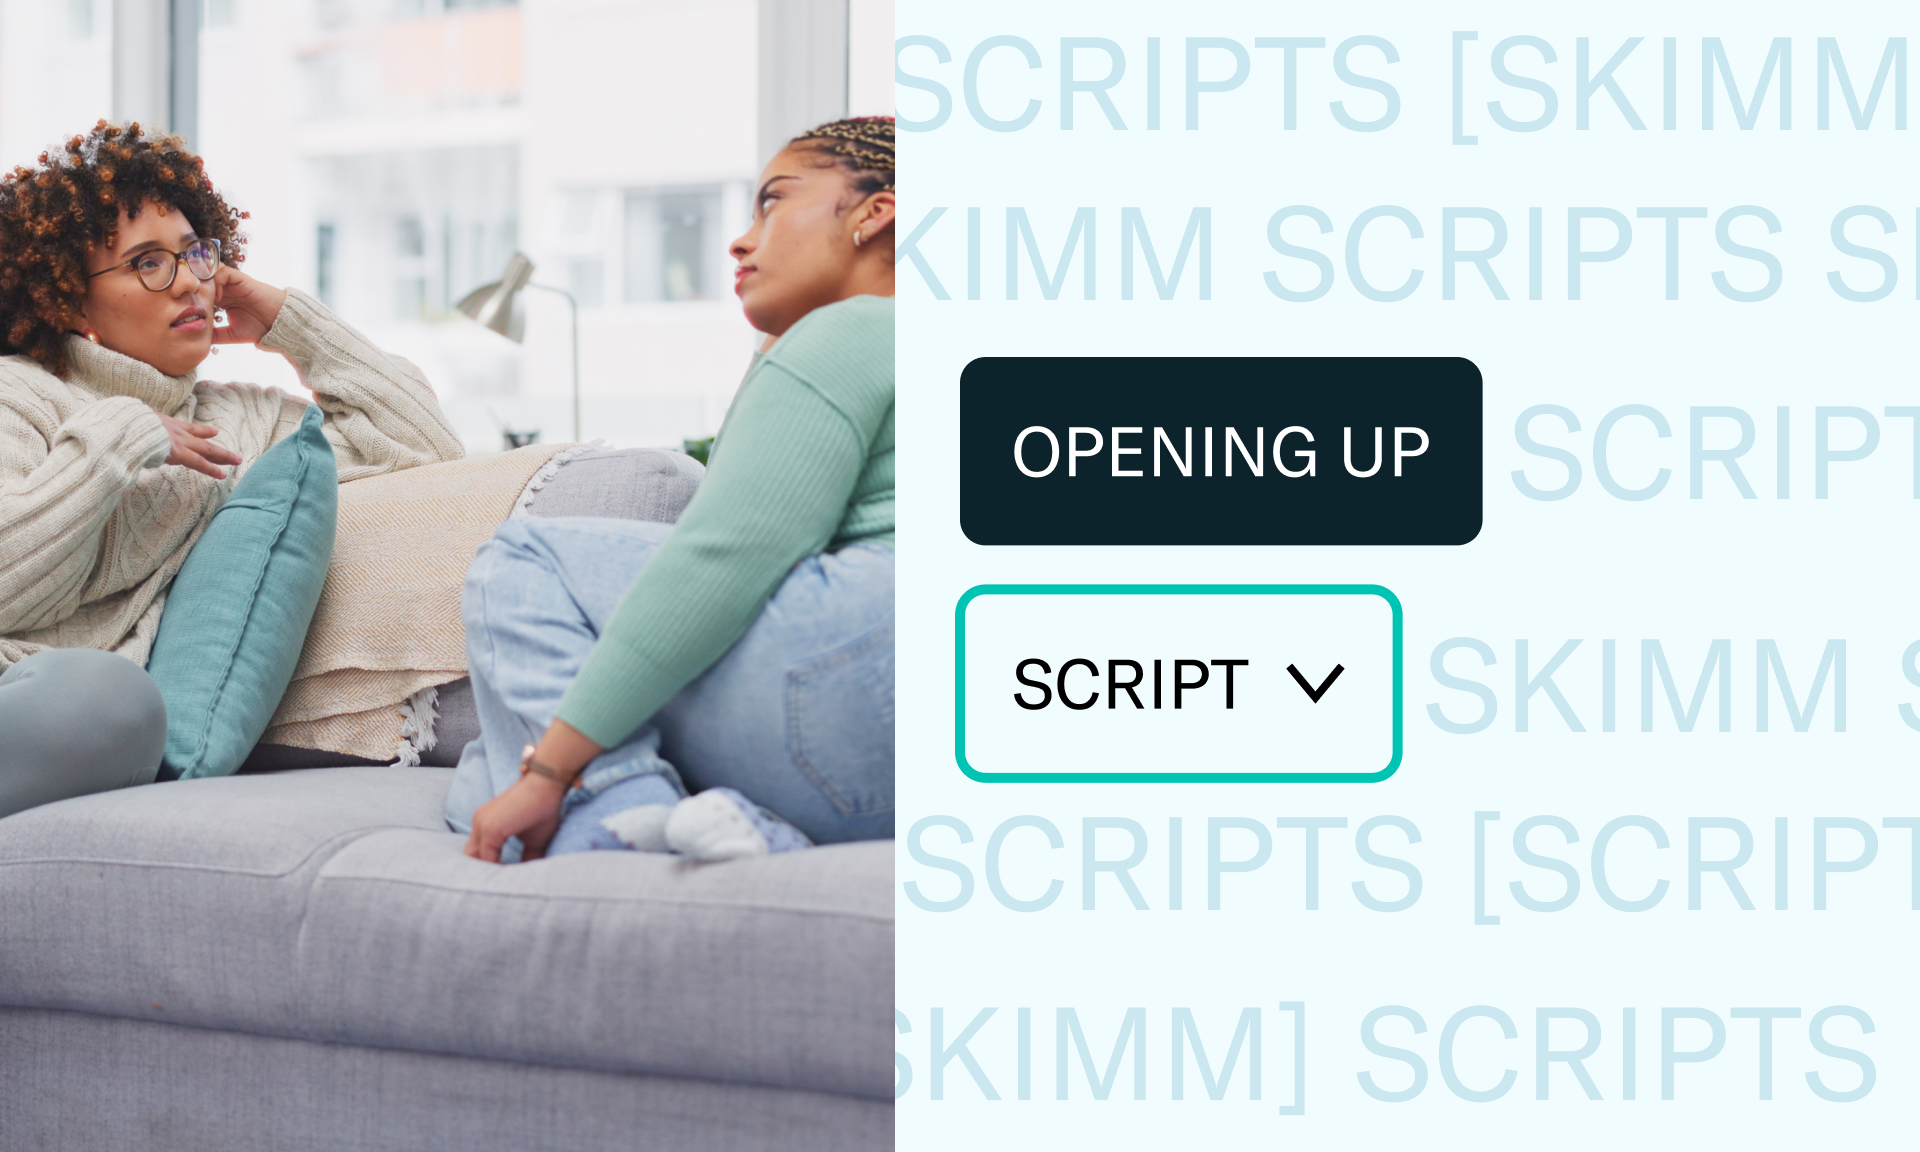 Two women chatting on a couch. Search text reads: "Opening up, script"